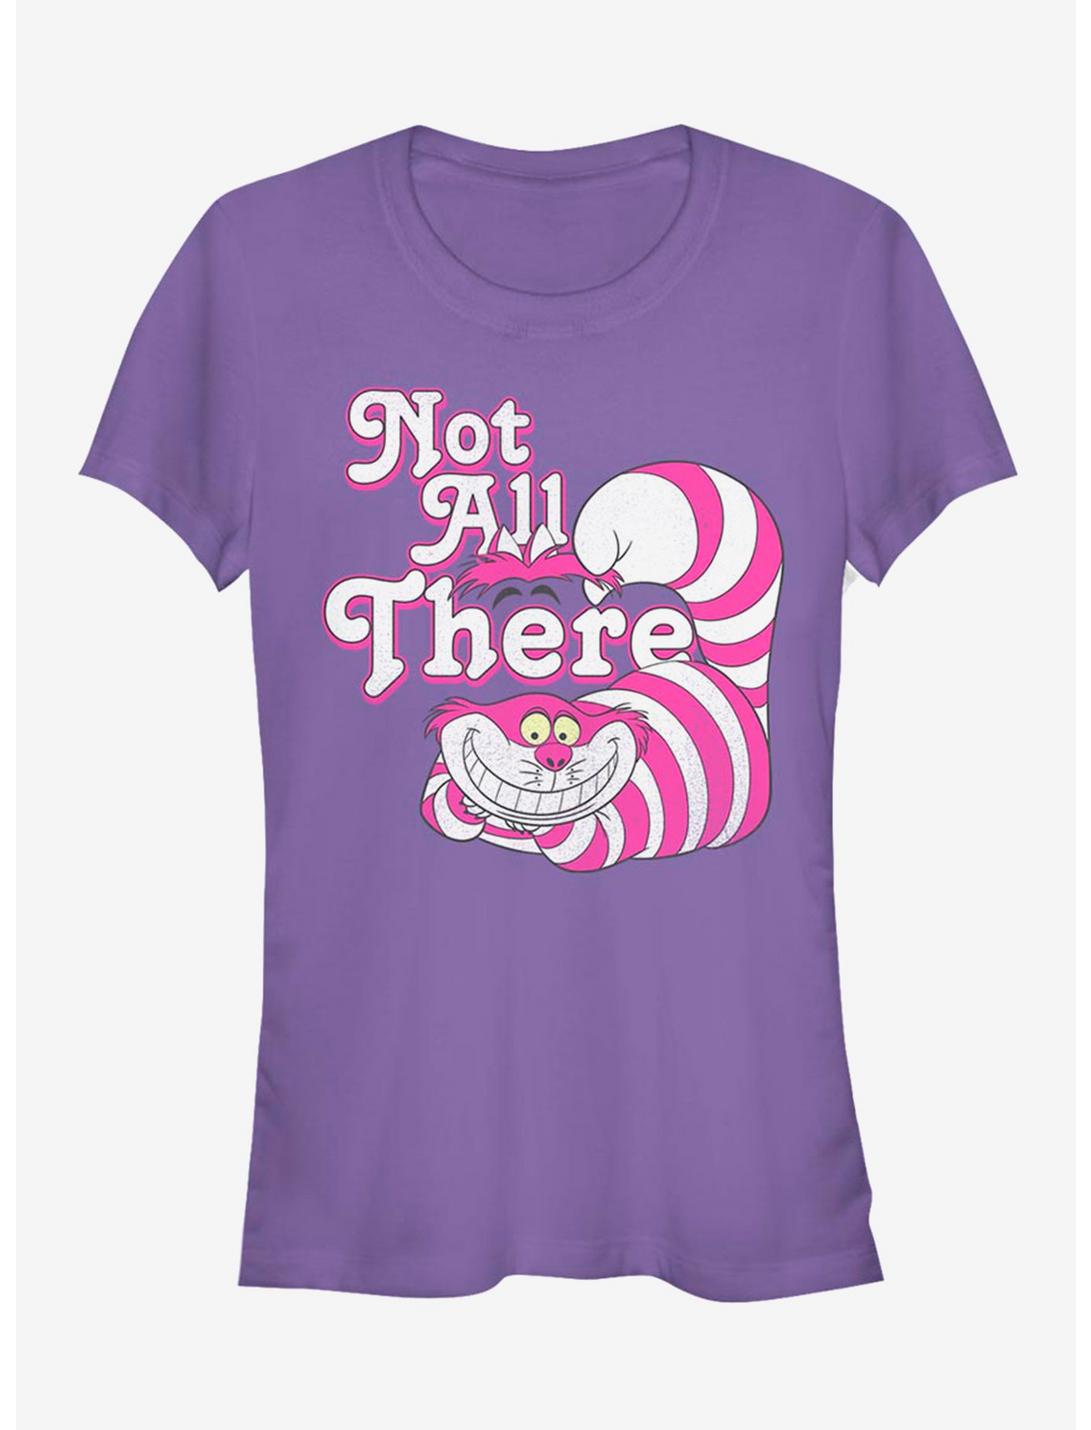 Disney Alice In Wonderland All There Girls T-Shirt, PURPLE, hi-res